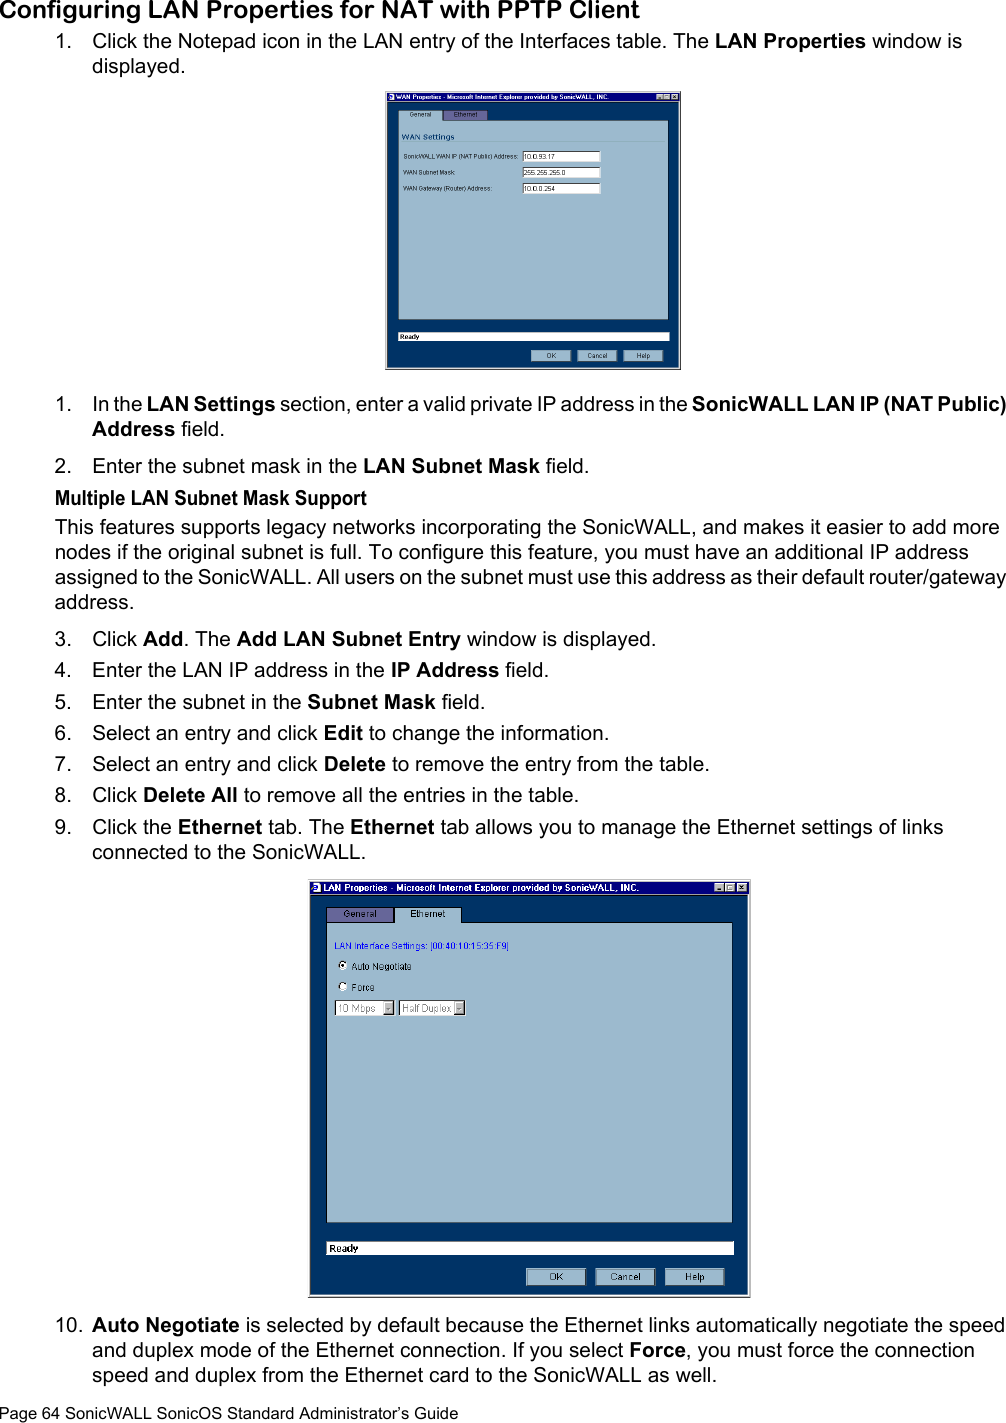 Page 64 SonicWALL SonicOS Standard Administrator’s GuideConfiguring LAN Properties for NAT with PPTP Client1. Click the Notepad icon in the LAN entry of the Interfaces table. The LAN Properties window is displayed.1. In the LAN Settings section, enter a valid private IP address in the SonicWALL LAN IP (NAT Public) Address field. 2. Enter the subnet mask in the LAN Subnet Mask field. Multiple LAN Subnet Mask SupportThis features supports legacy networks incorporating the SonicWALL, and makes it easier to add more nodes if the original subnet is full. To configure this feature, you must have an additional IP address assigned to the SonicWALL. All users on the subnet must use this address as their default router/gateway address. 3. Click Add. The Add LAN Subnet Entry window is displayed. 4. Enter the LAN IP address in the IP Address field. 5. Enter the subnet in the Subnet Mask field. 6. Select an entry and click Edit to change the information.7. Select an entry and click Delete to remove the entry from the table. 8. Click Delete All to remove all the entries in the table.9. Click the Ethernet tab. The Ethernet tab allows you to manage the Ethernet settings of links connected to the SonicWALL. 10. Auto Negotiate is selected by default because the Ethernet links automatically negotiate the speed and duplex mode of the Ethernet connection. If you select Force, you must force the connection speed and duplex from the Ethernet card to the SonicWALL as well. 